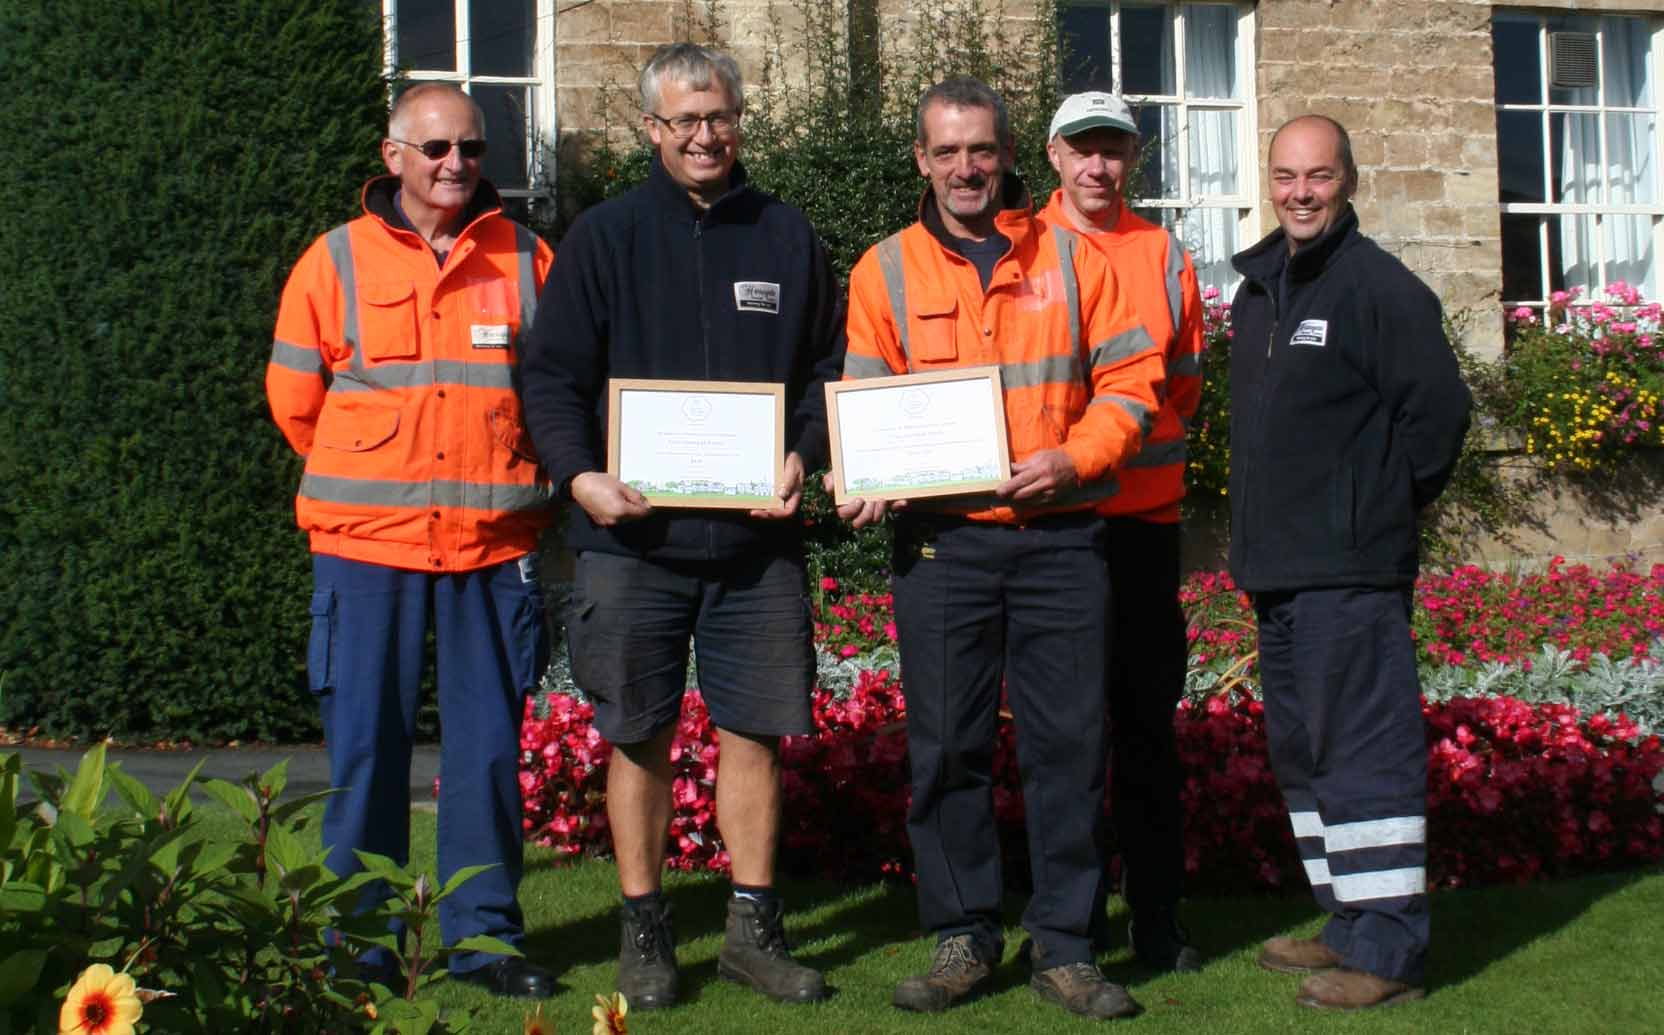 Harrogate Borough Council parks team members Martin Spence, James Howitt, Keith Whincup, David Todd, Andrew Harrison celebrate Knaresborough Castle and Knaresborough House’s success in the Yorkshire in Bloom awards